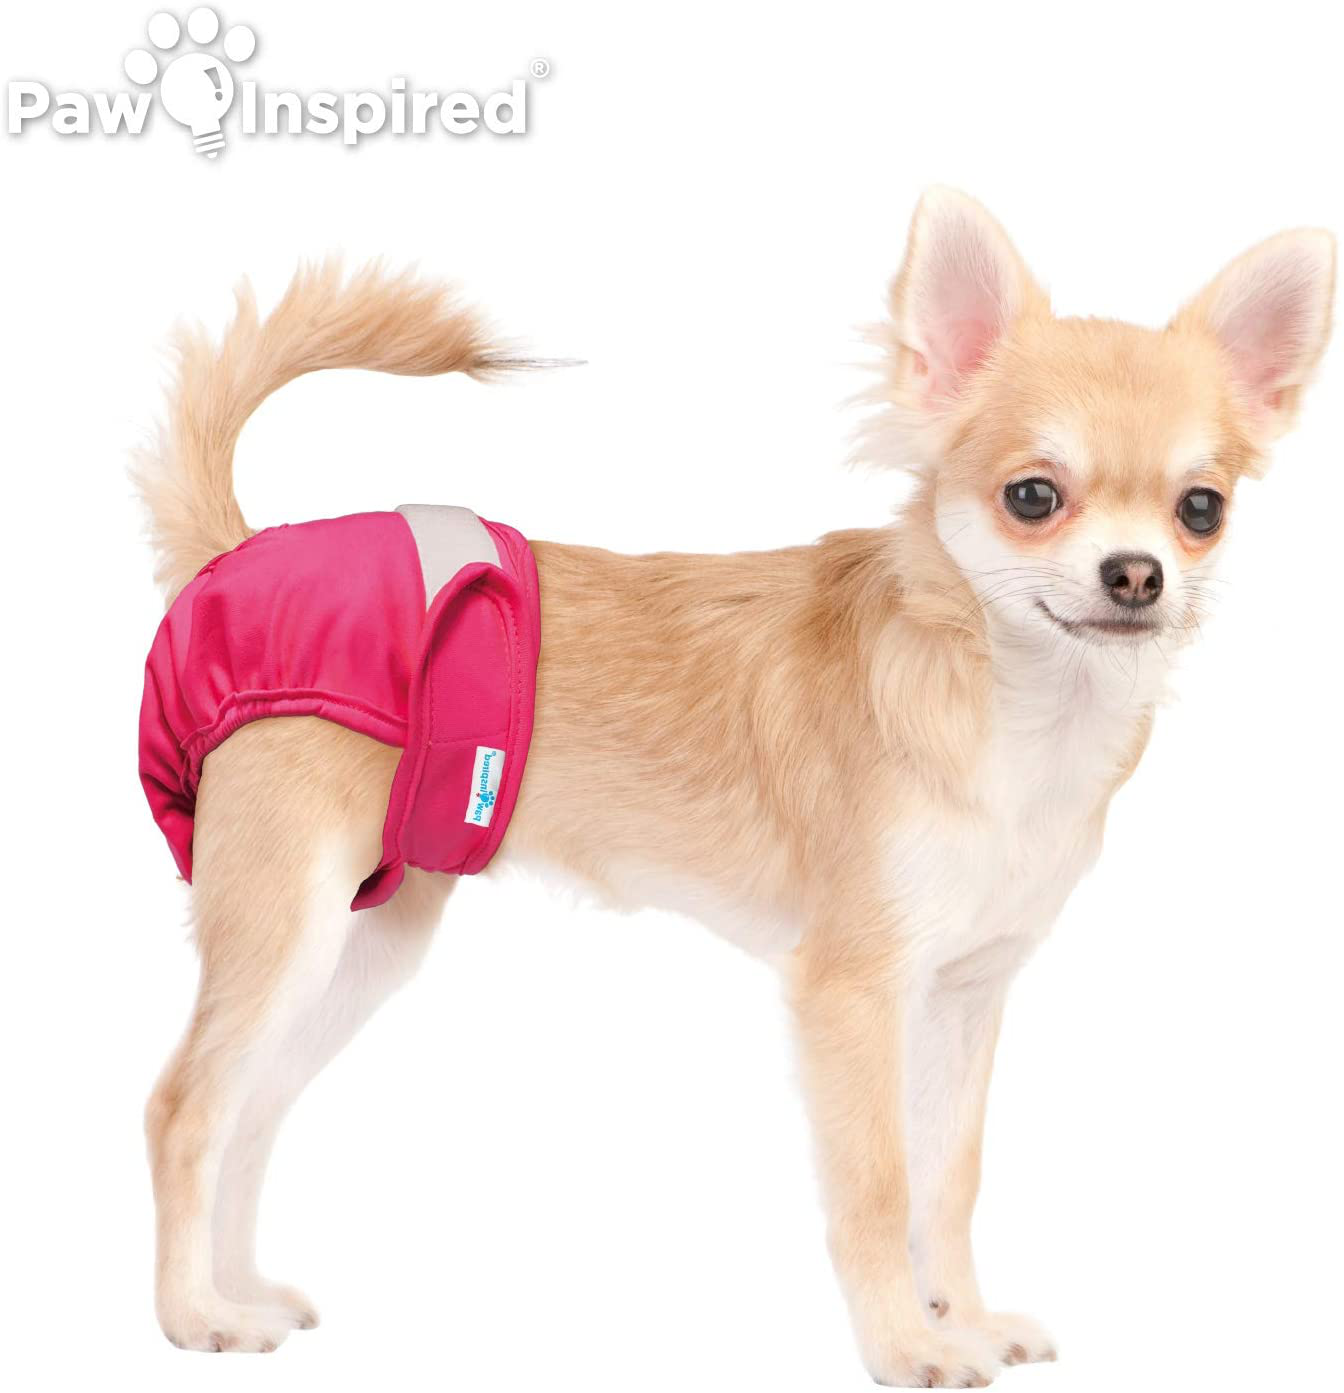 Paw Inspired Washable Dog Diapers | Reusable Dog Diapers | Washable Female Dog Diapers | Cloth Dog Diapers for Dogs in Heat, or Dog Incontinence Diapers Animals & Pet Supplies > Pet Supplies > Dog Supplies > Dog Diaper Pads & Liners Paw Inspired   